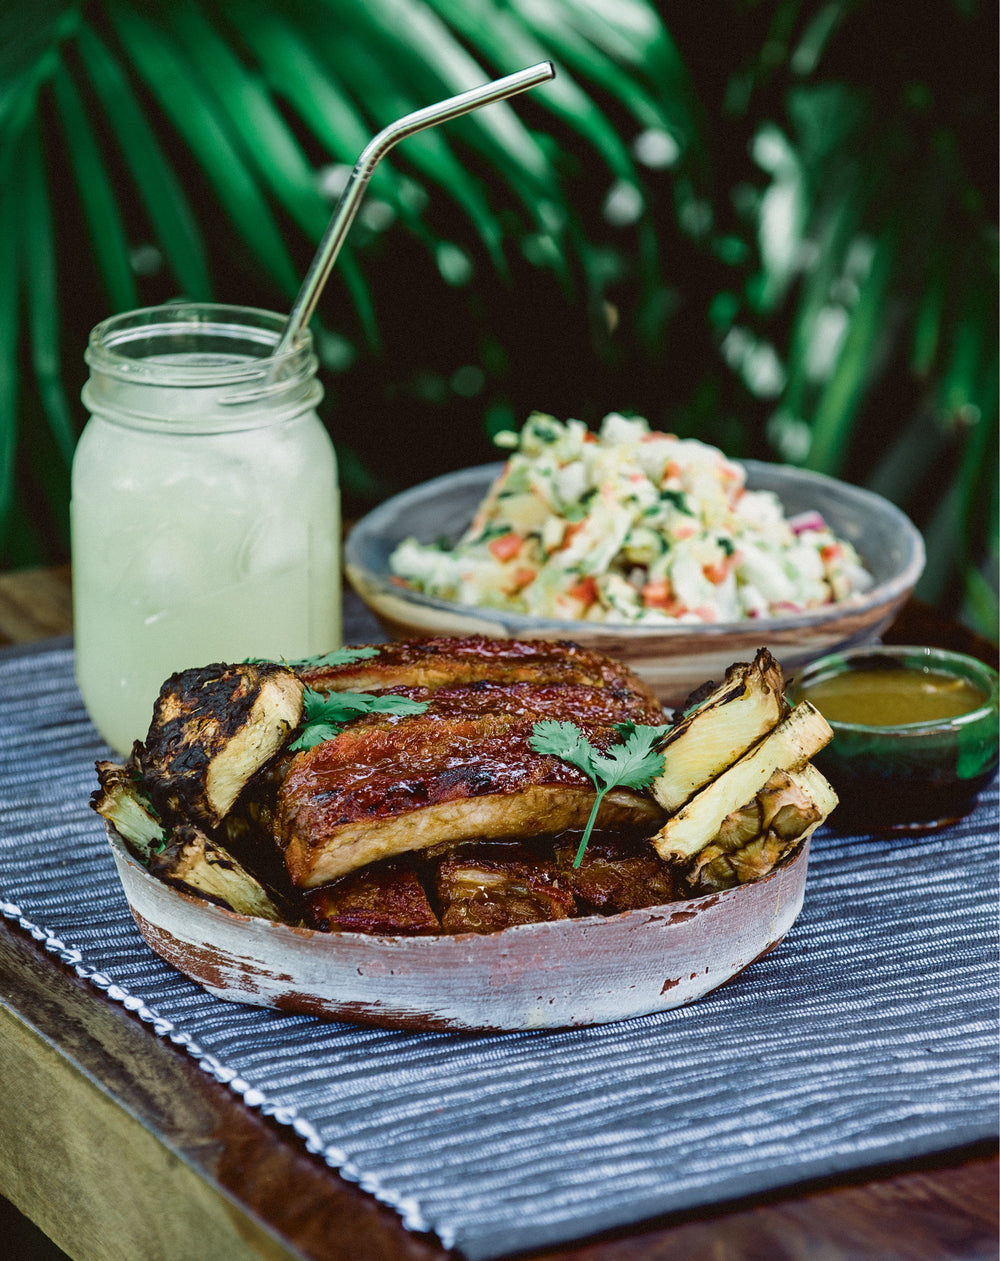 Wasabi, Honey, and Soy-Glazed Baby Back Ribs with Pineapple, Jicama, and Pickled Ginger Slaw